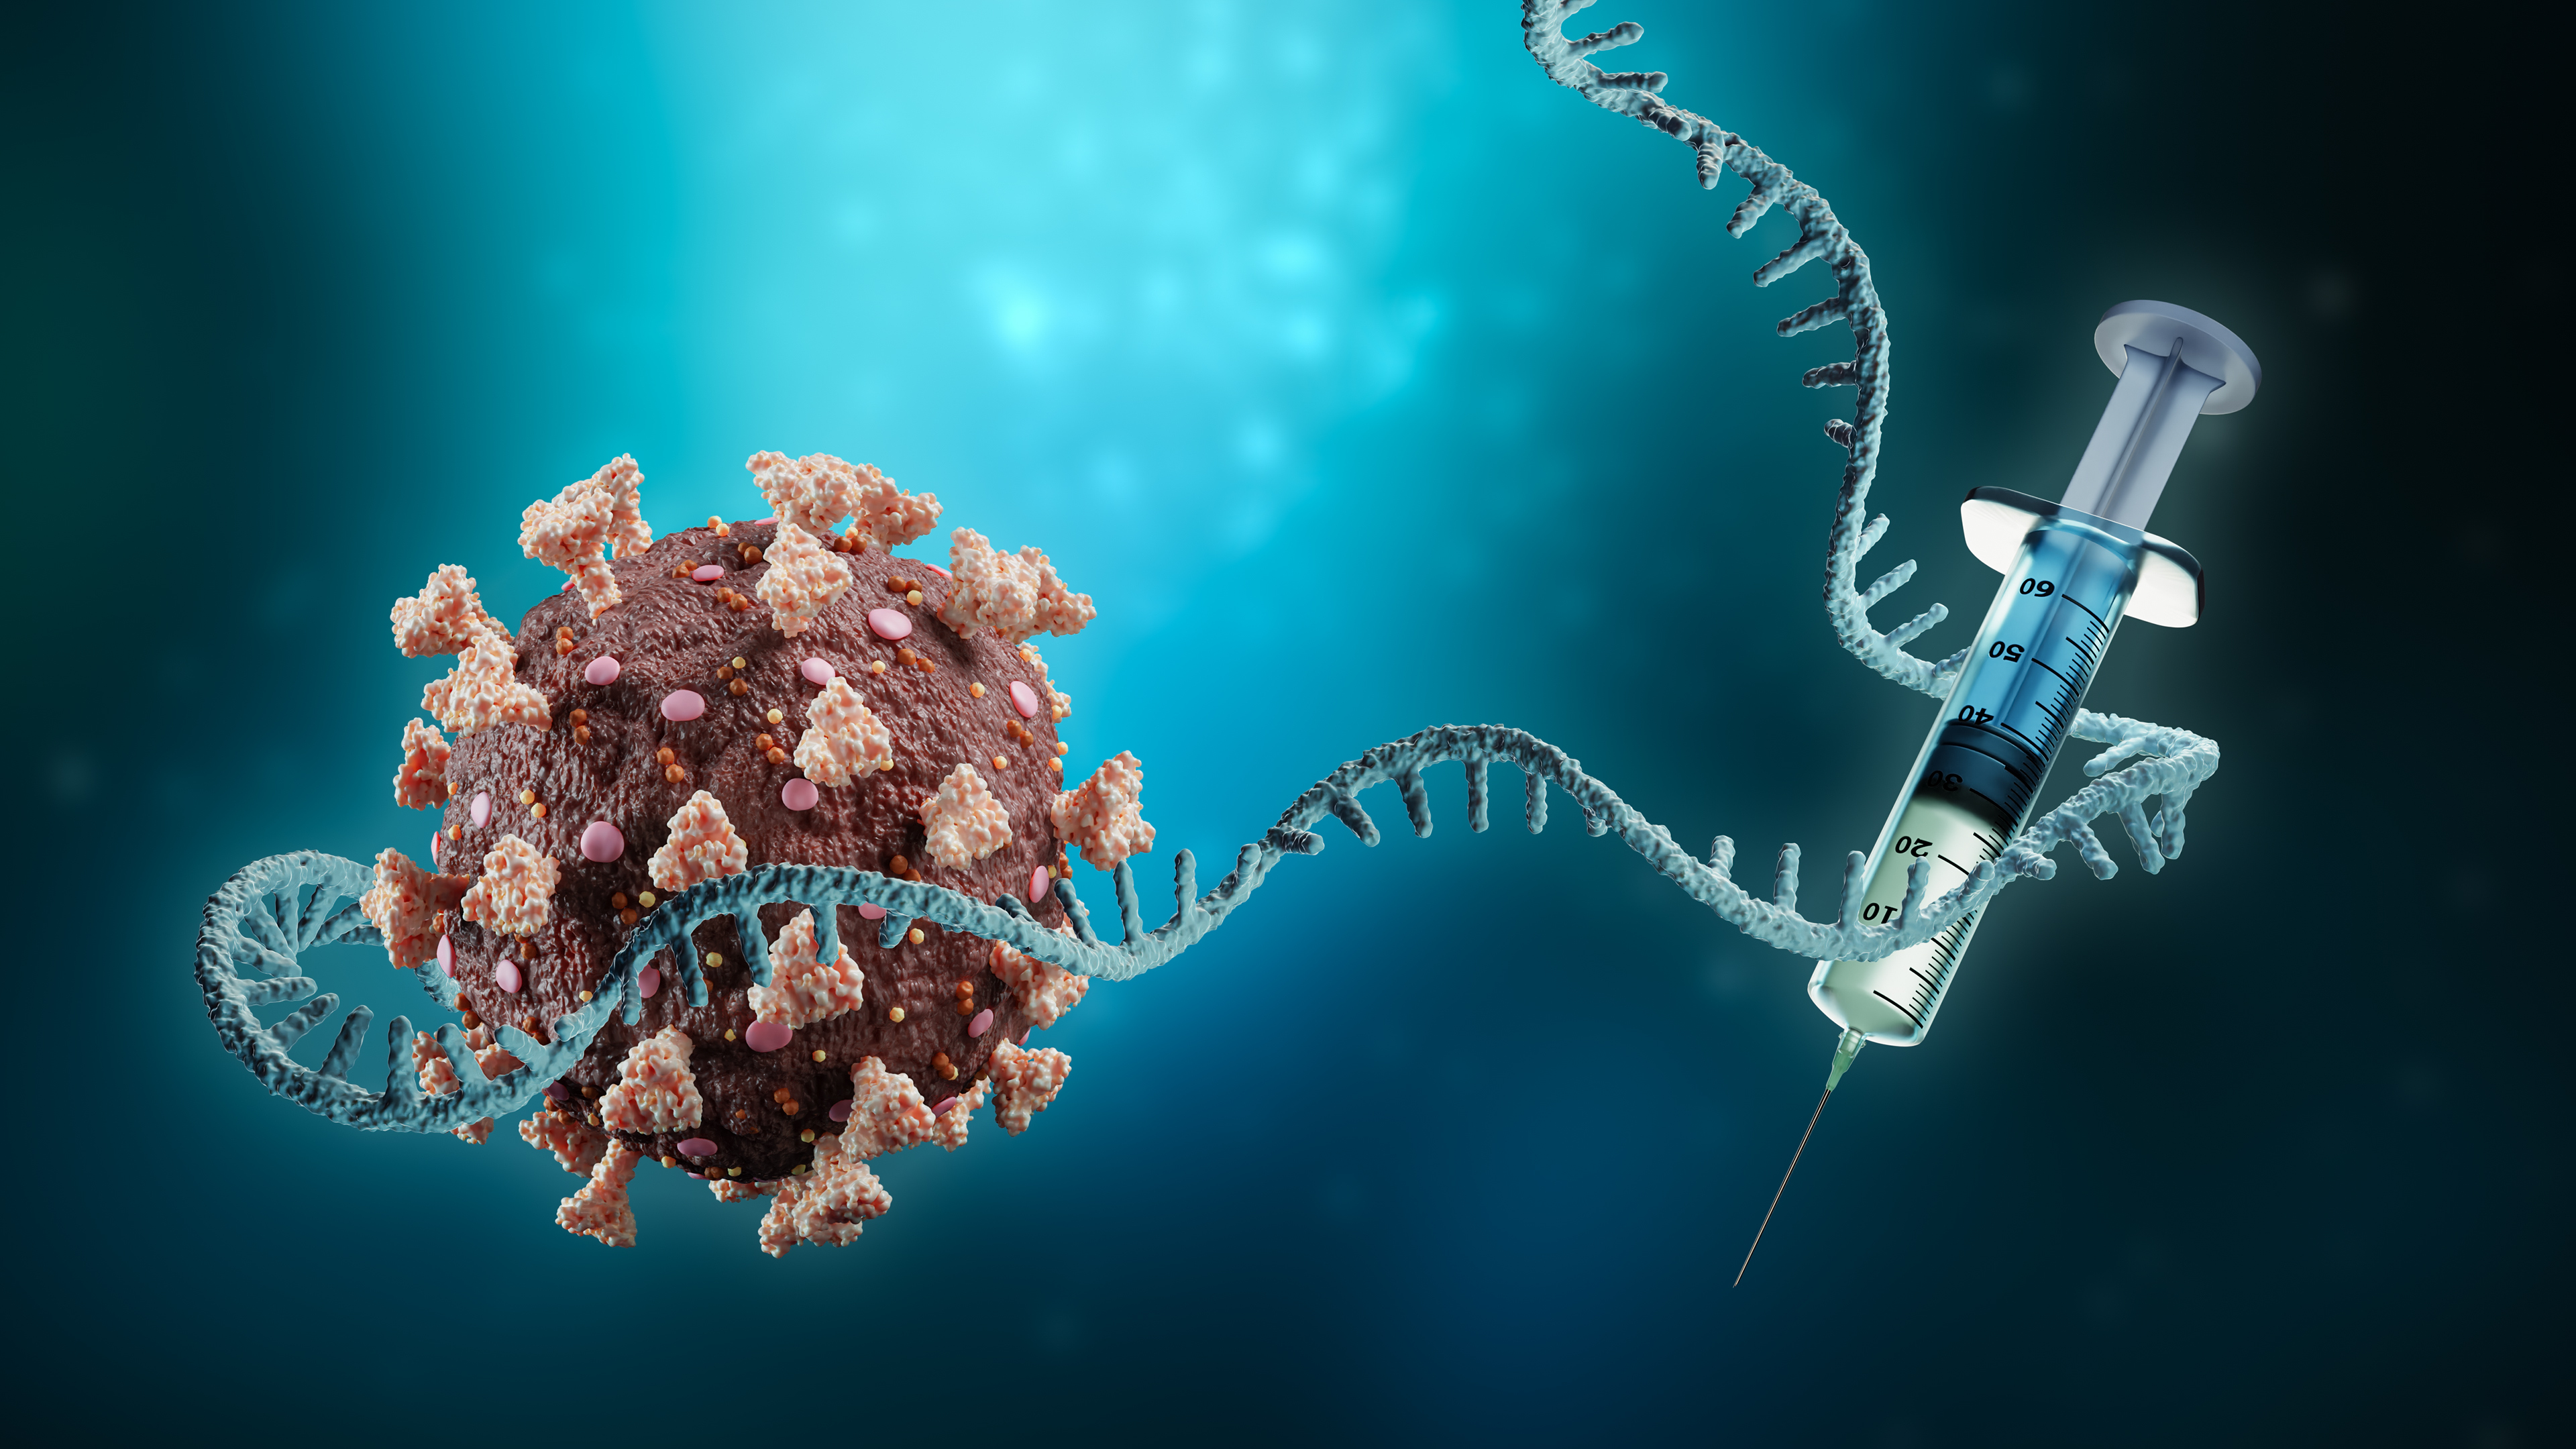 “Plug and Play” mRNA technology works fast, updating vaccines in months